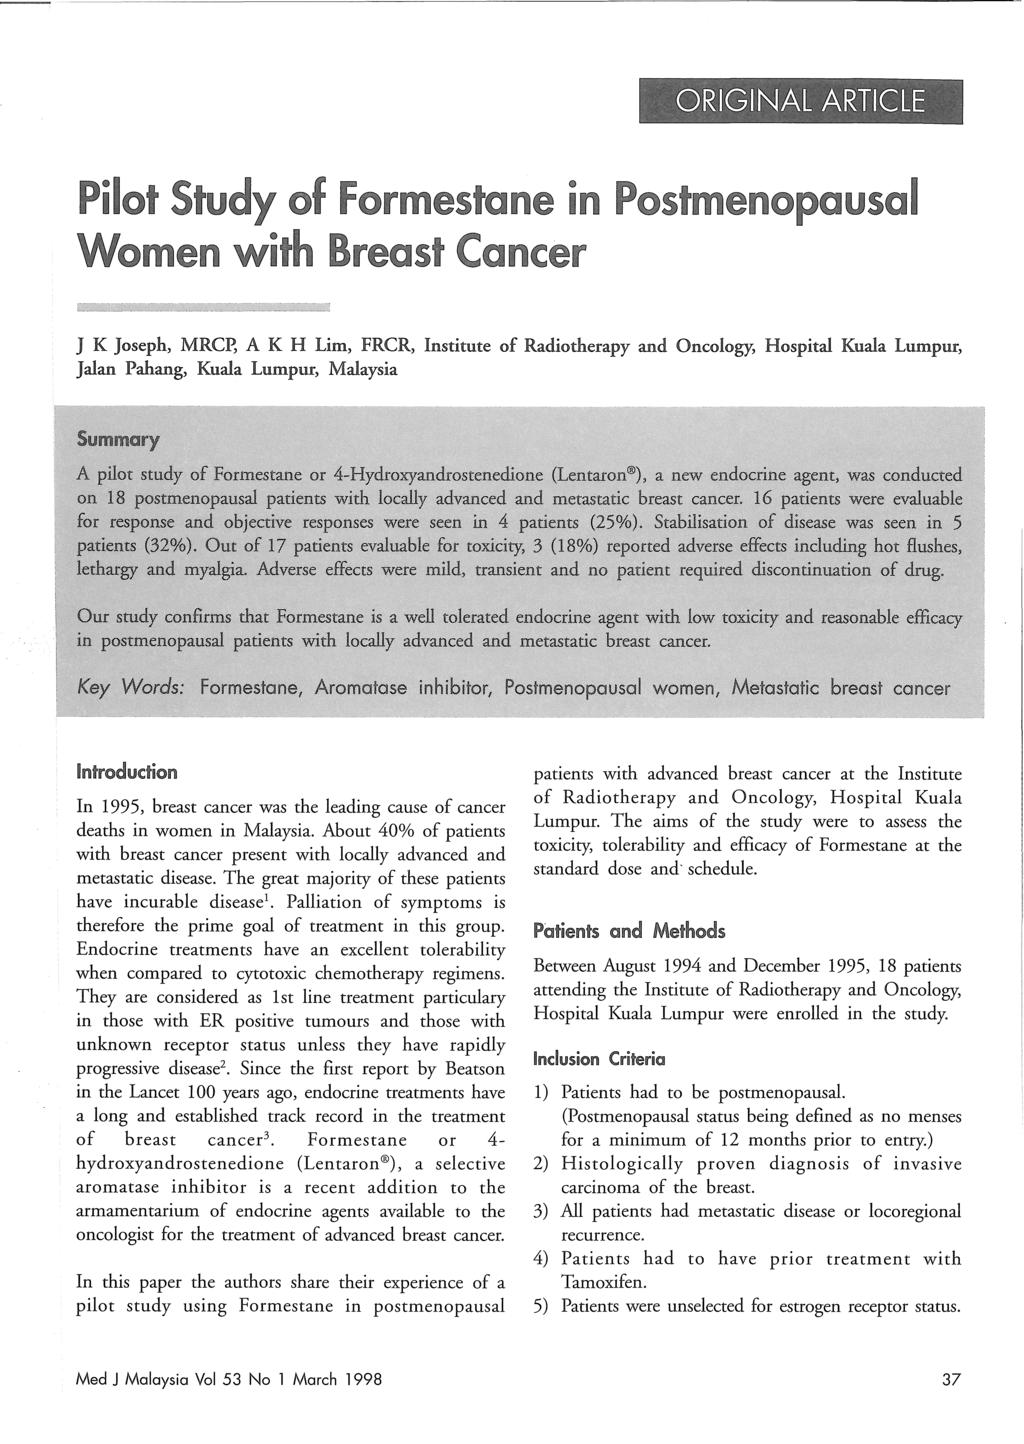 Pilot Study of Formestane in Postmenopausal Breast Cancer J K Joseph, MRCp, A K H Lim, FRCR, Institute of Radiotherapy and Oncology, Hospital Kuala Lumpur, Jalan Pahang, Kuala Lumpur, Malaysia In